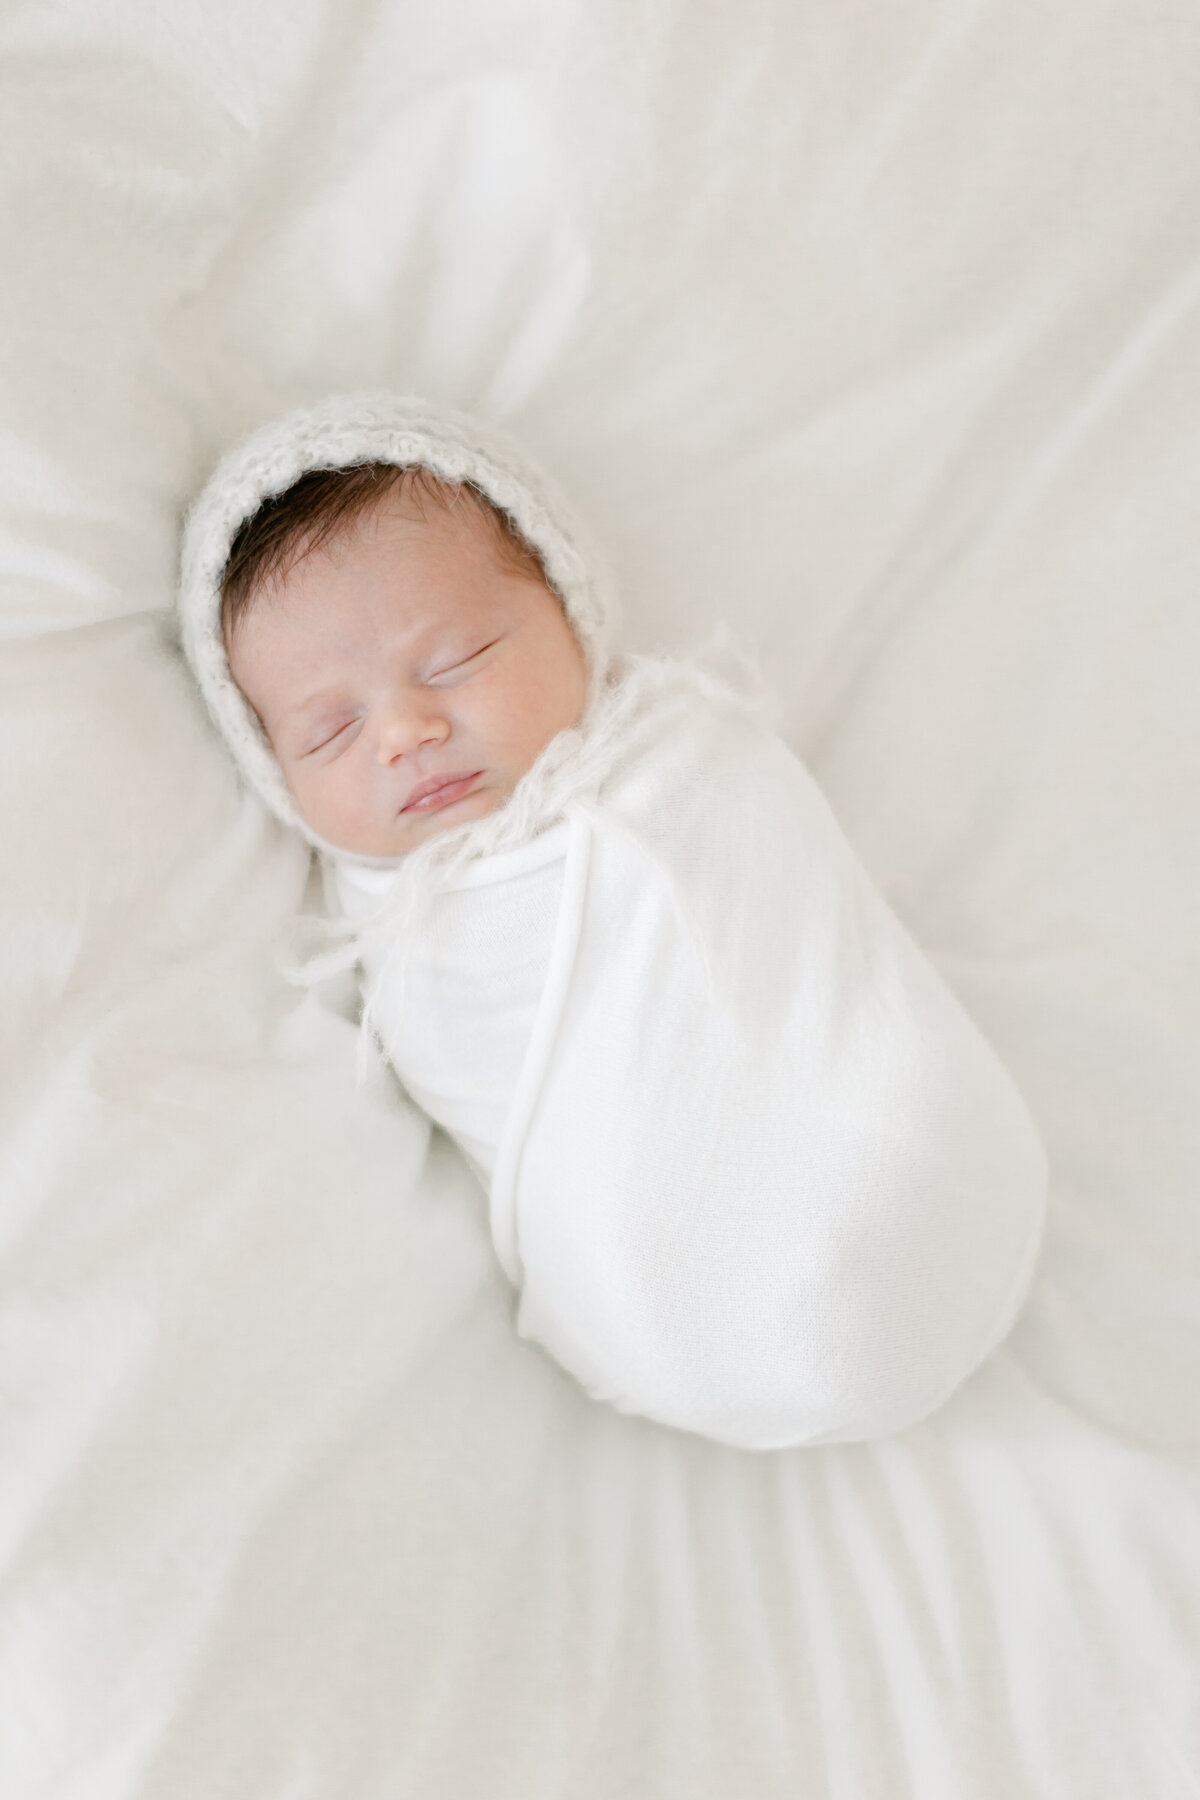 sweet baby boy swaddled in a white blanket wearing a bonnet laying on a bed during his newborn session photographed by Philadelphia Newborn Photographer Tara Federico